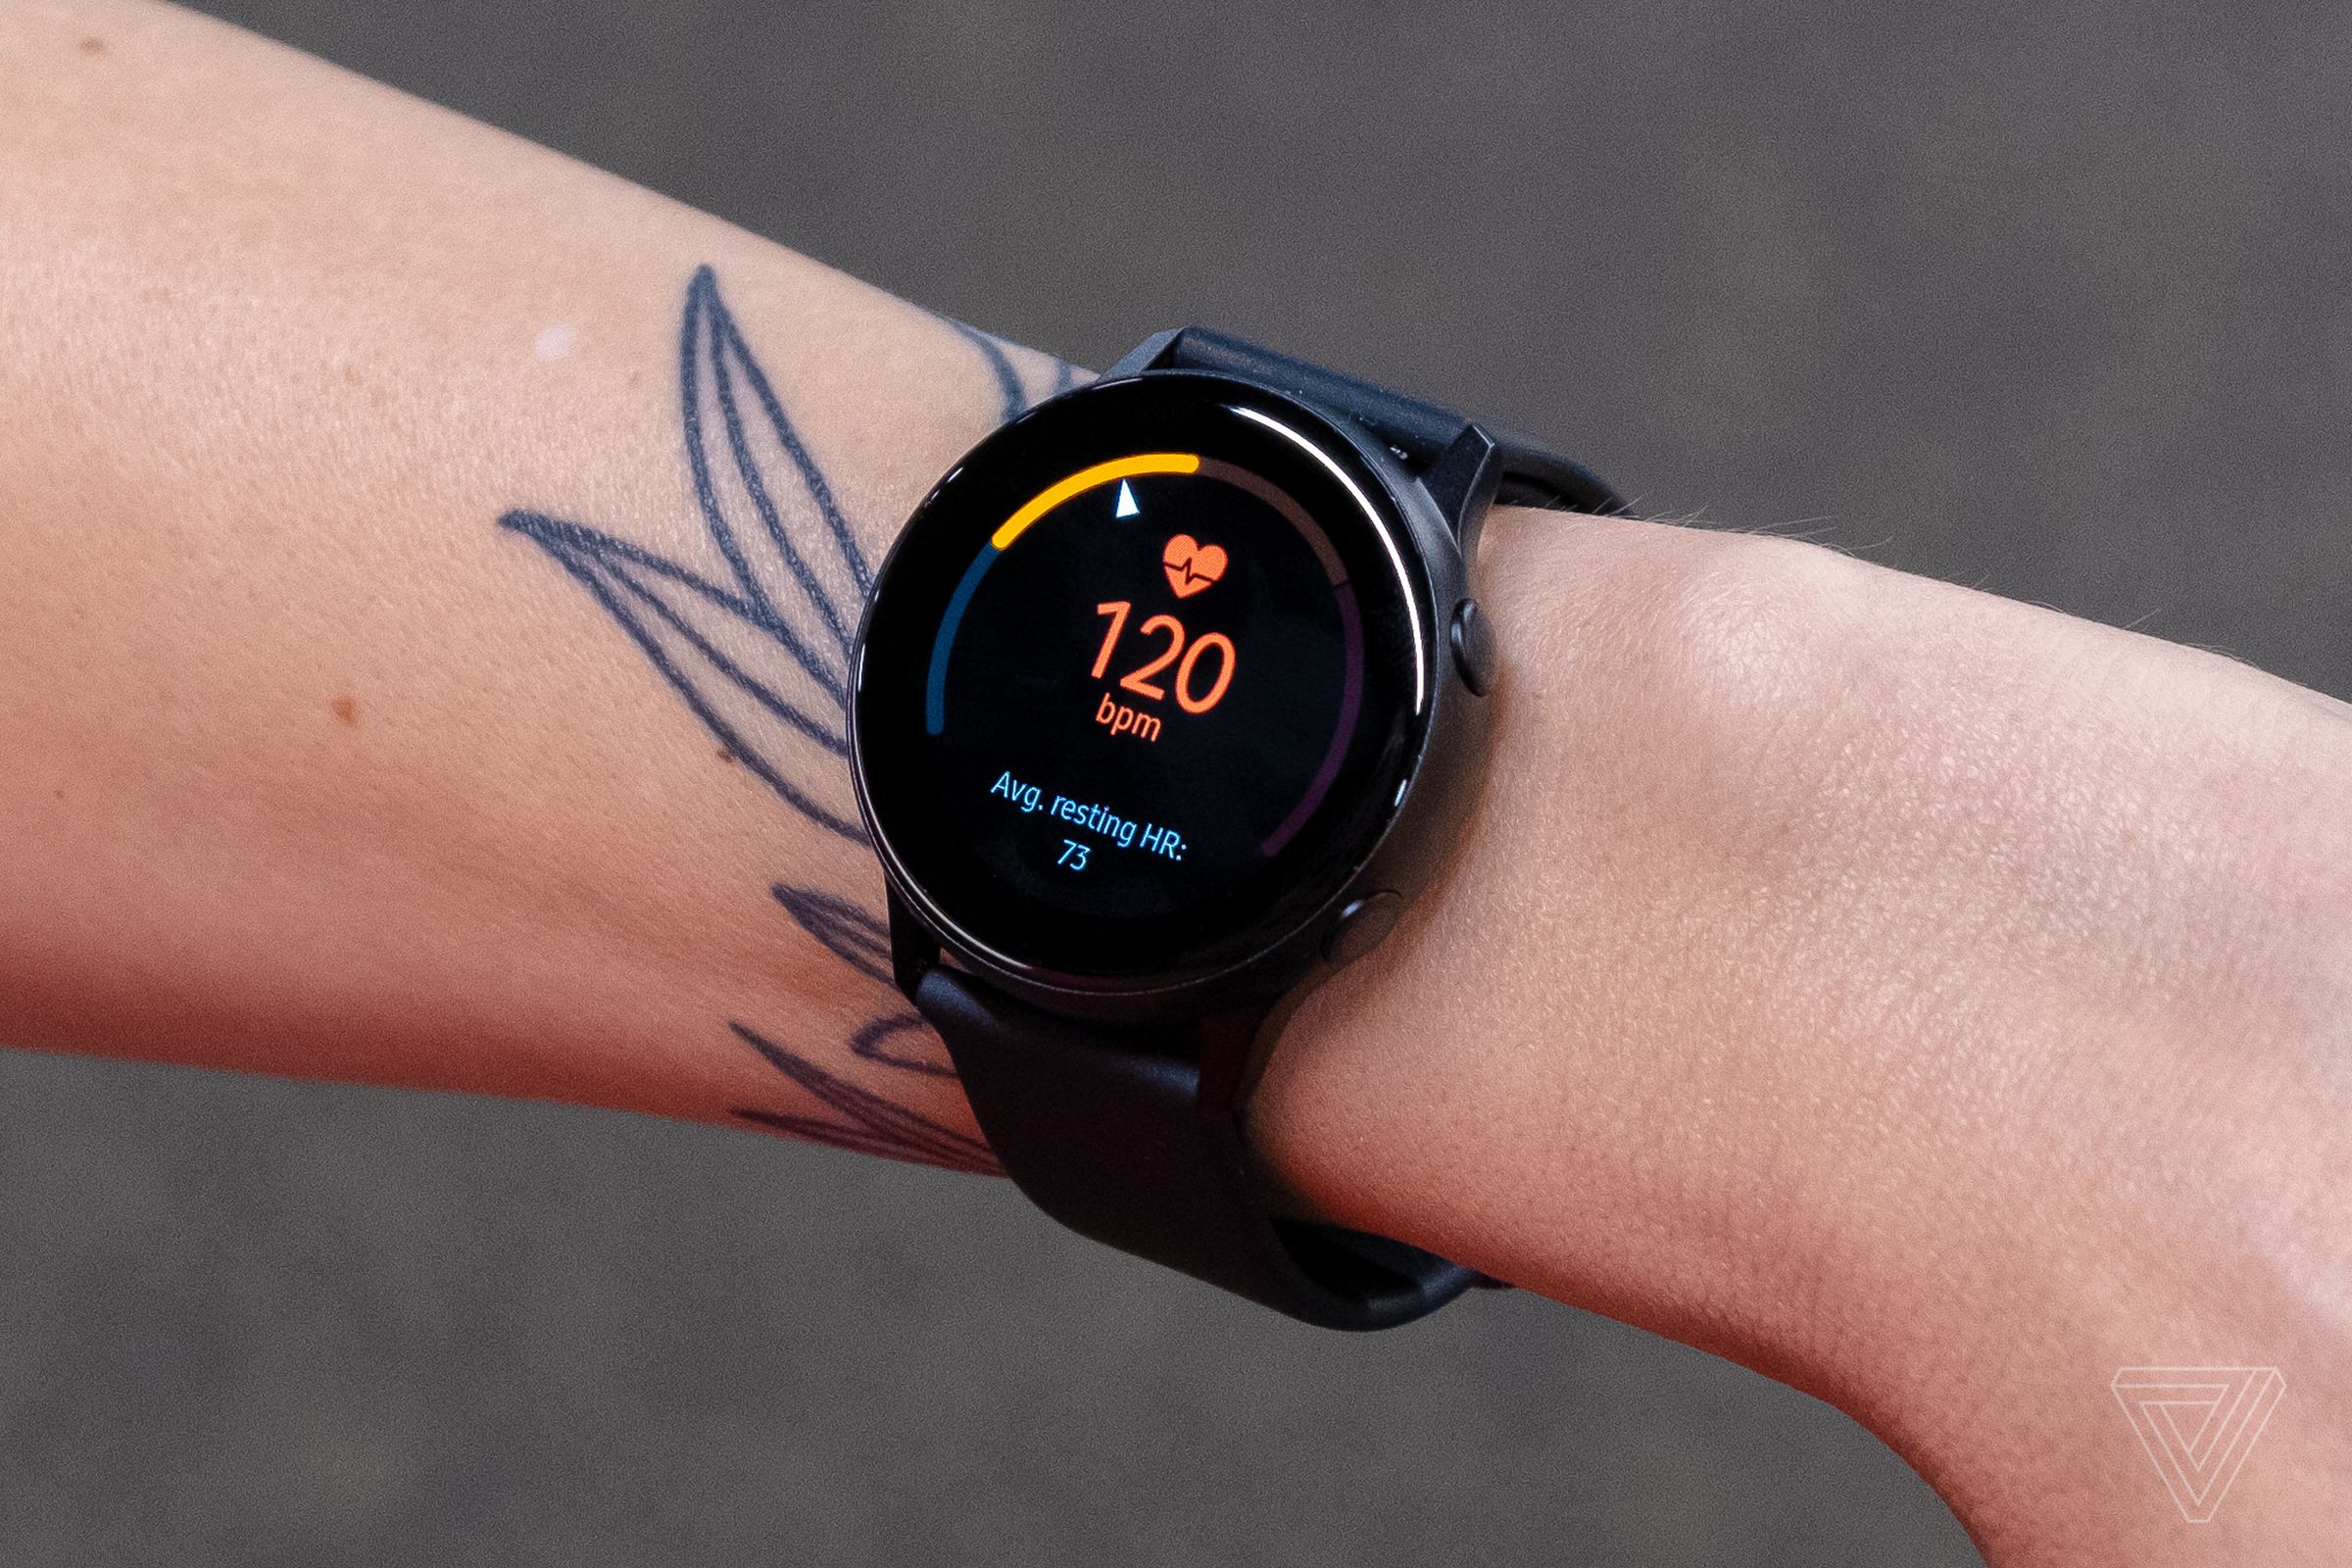 The original Galaxy Watch Active (pictured), only had an optical heart rate tracker.